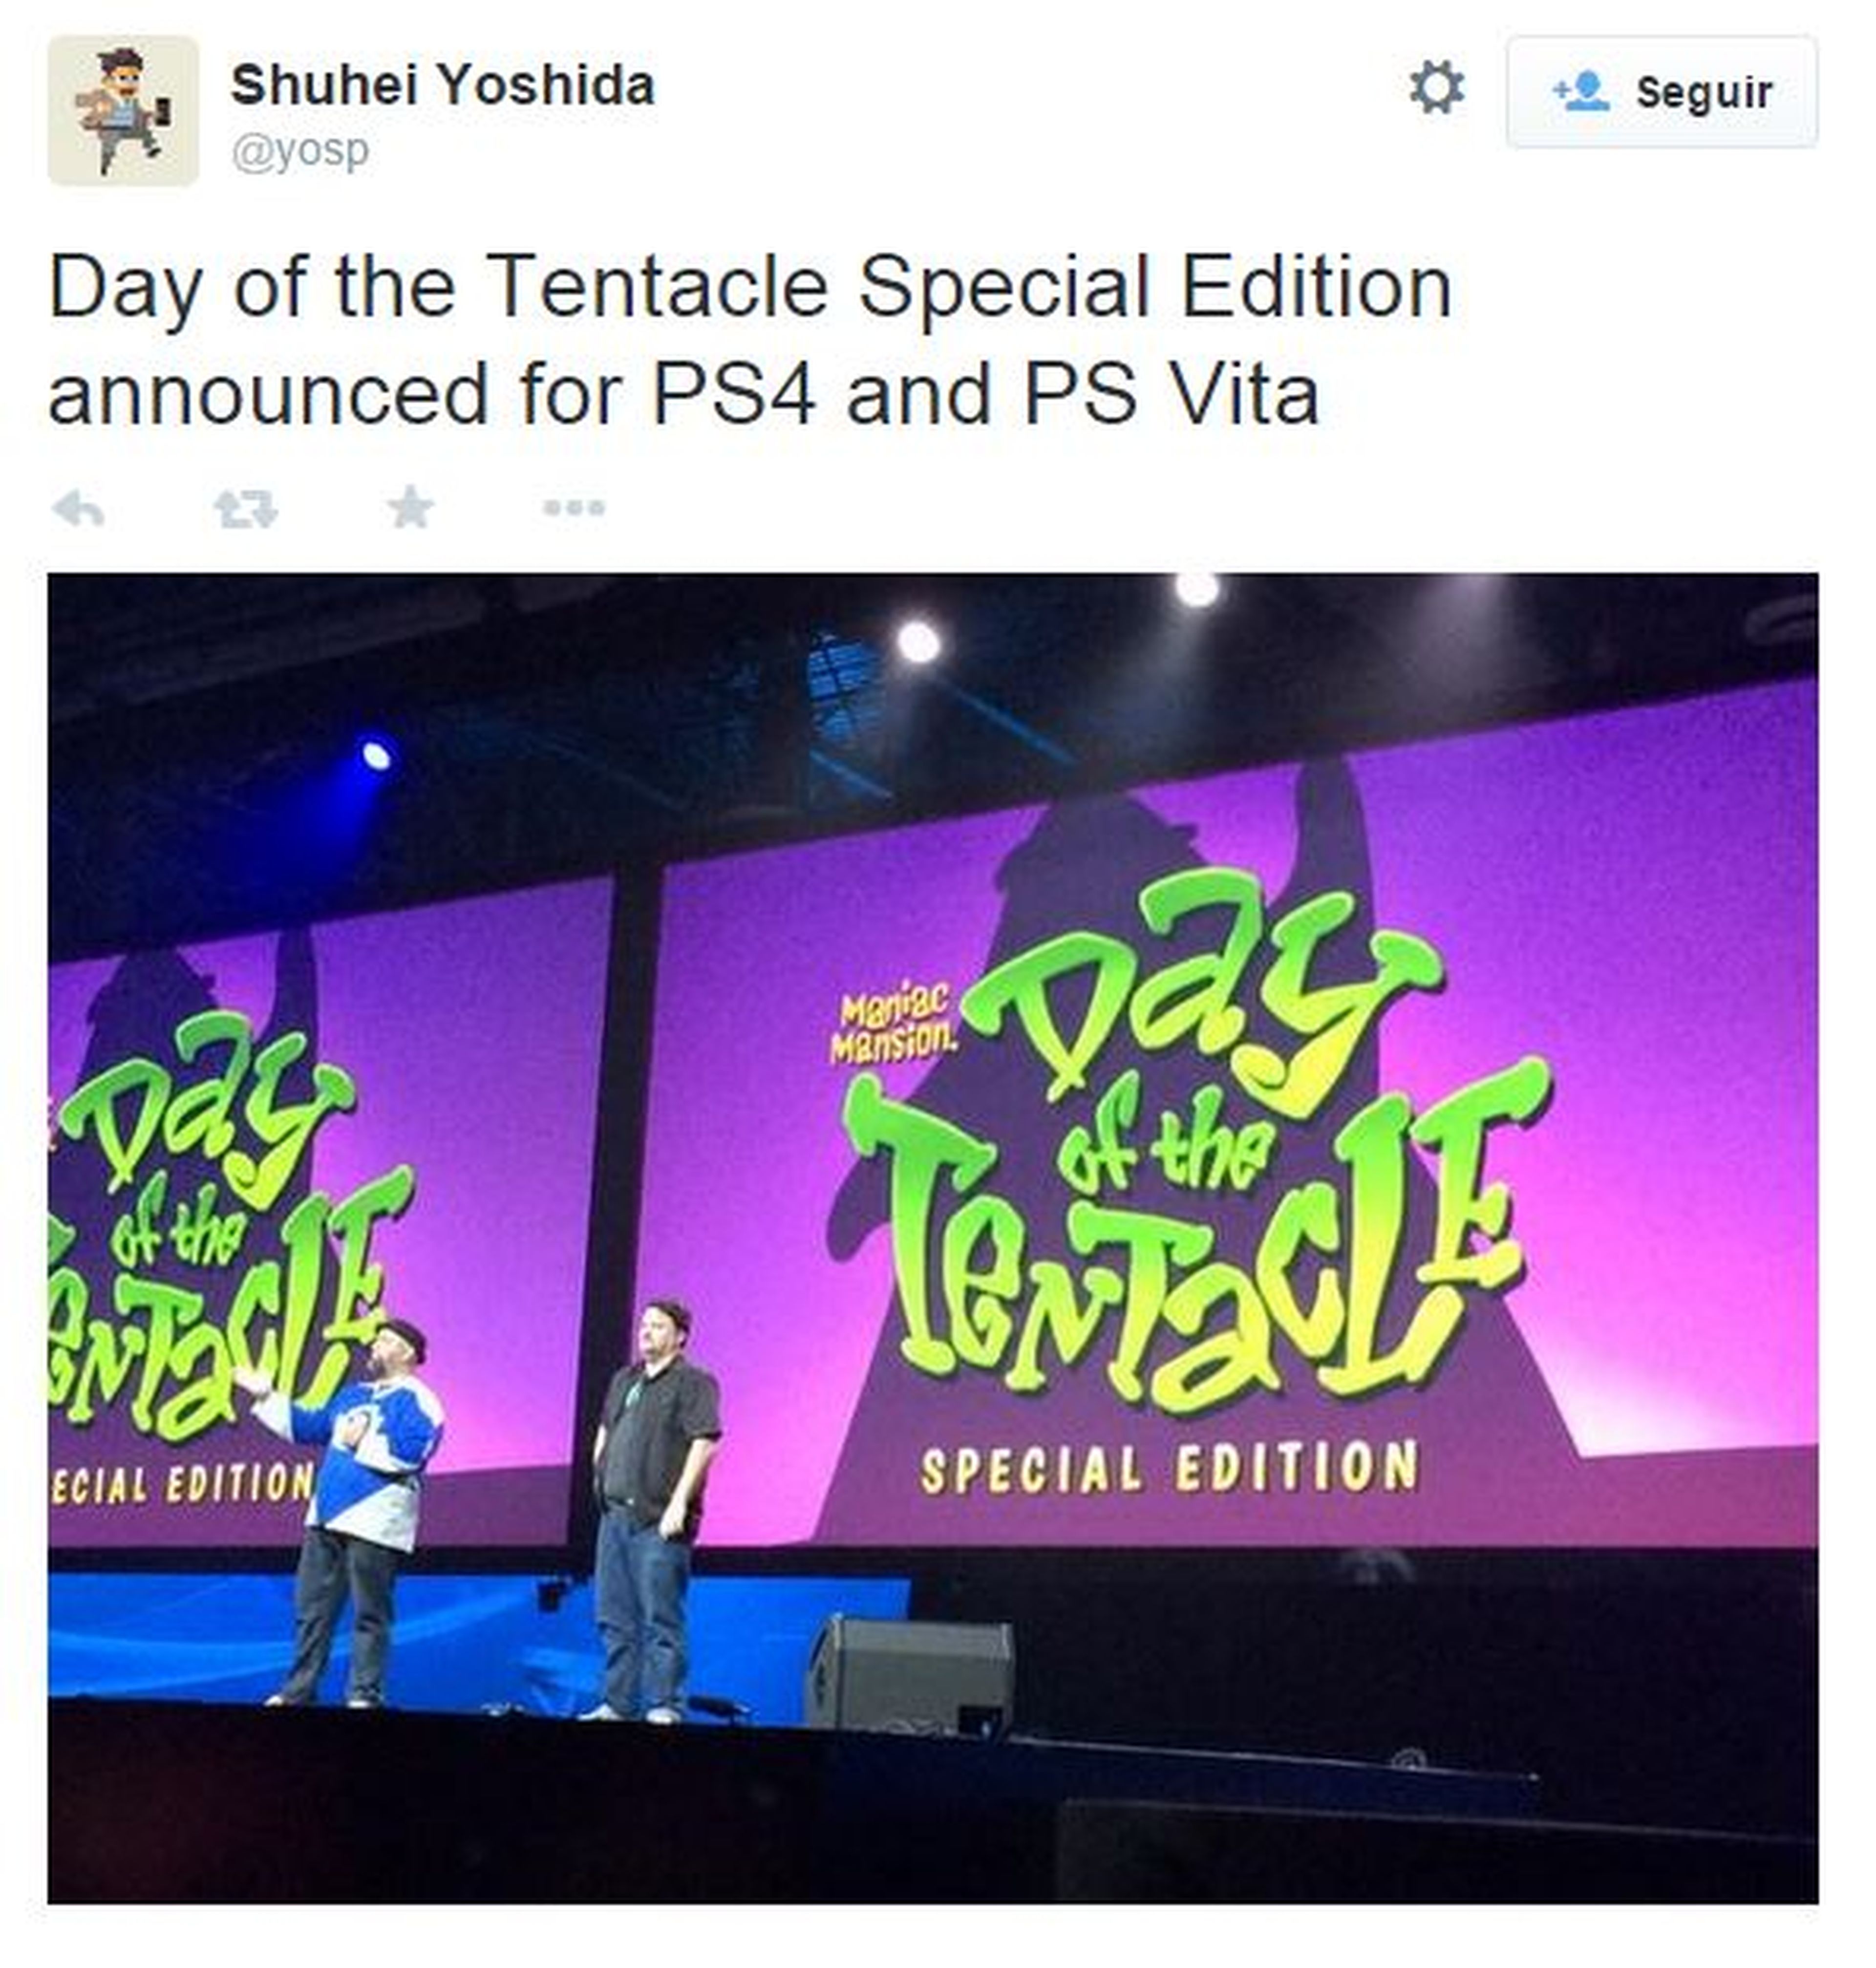 Playstation Experience: Double Fine anuncia Day of the Tentacle Special Edition para PS4, Vita y PC